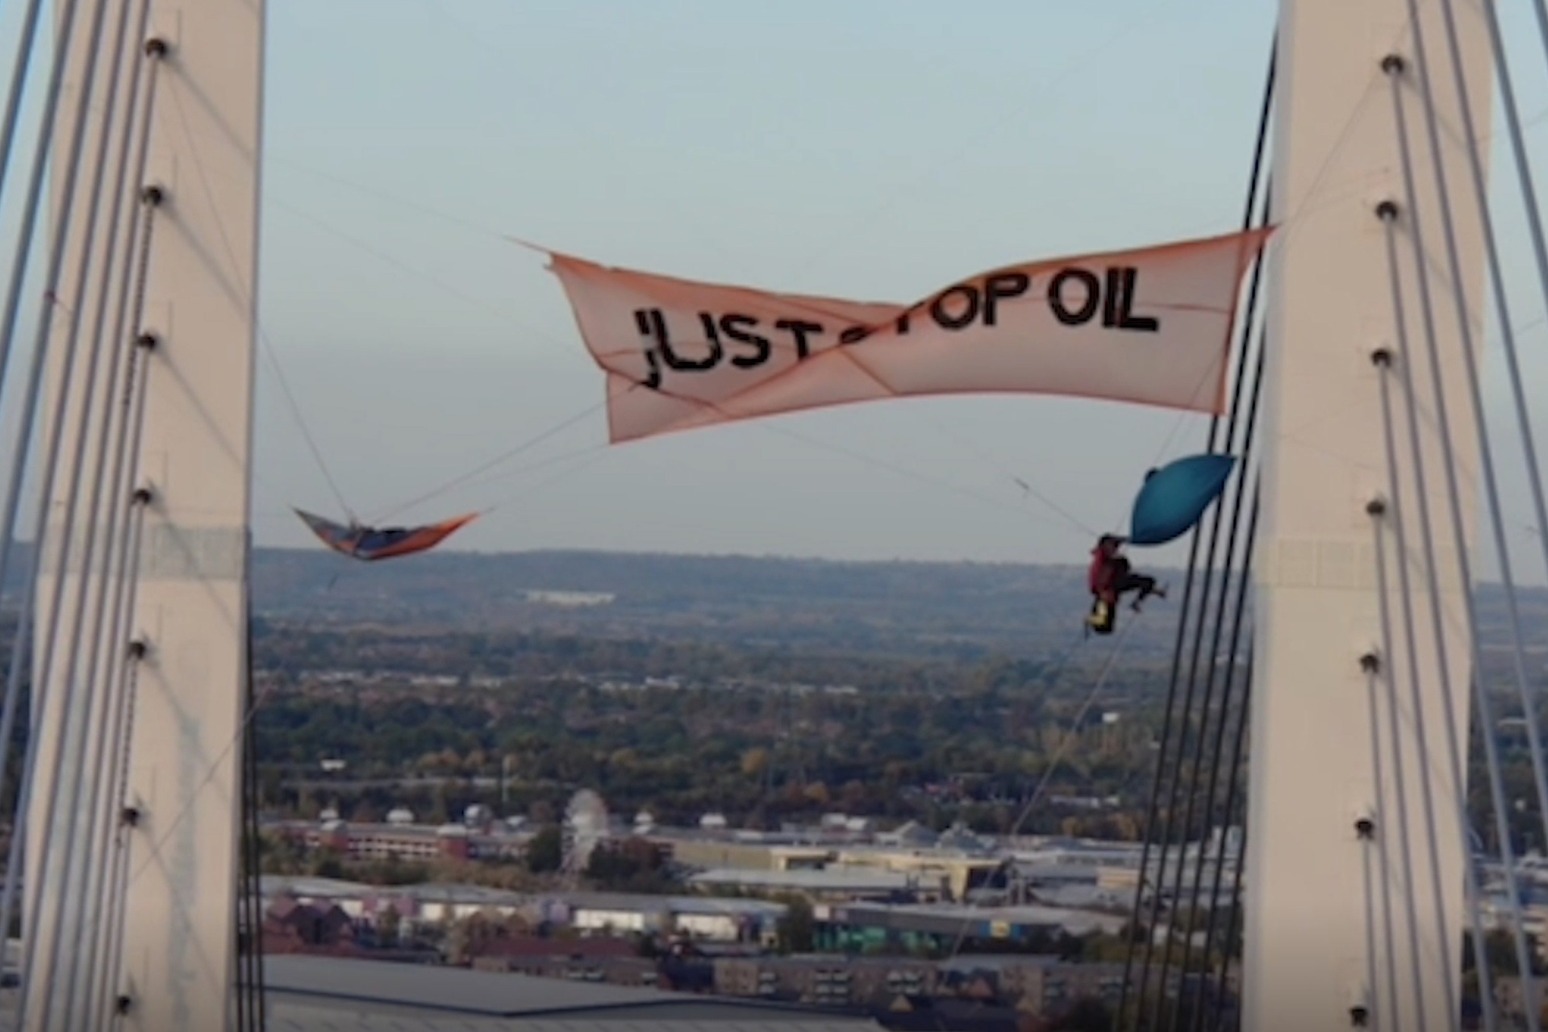 Just Stop Oil protesters lose appeals against jail terms for scaling bridge 